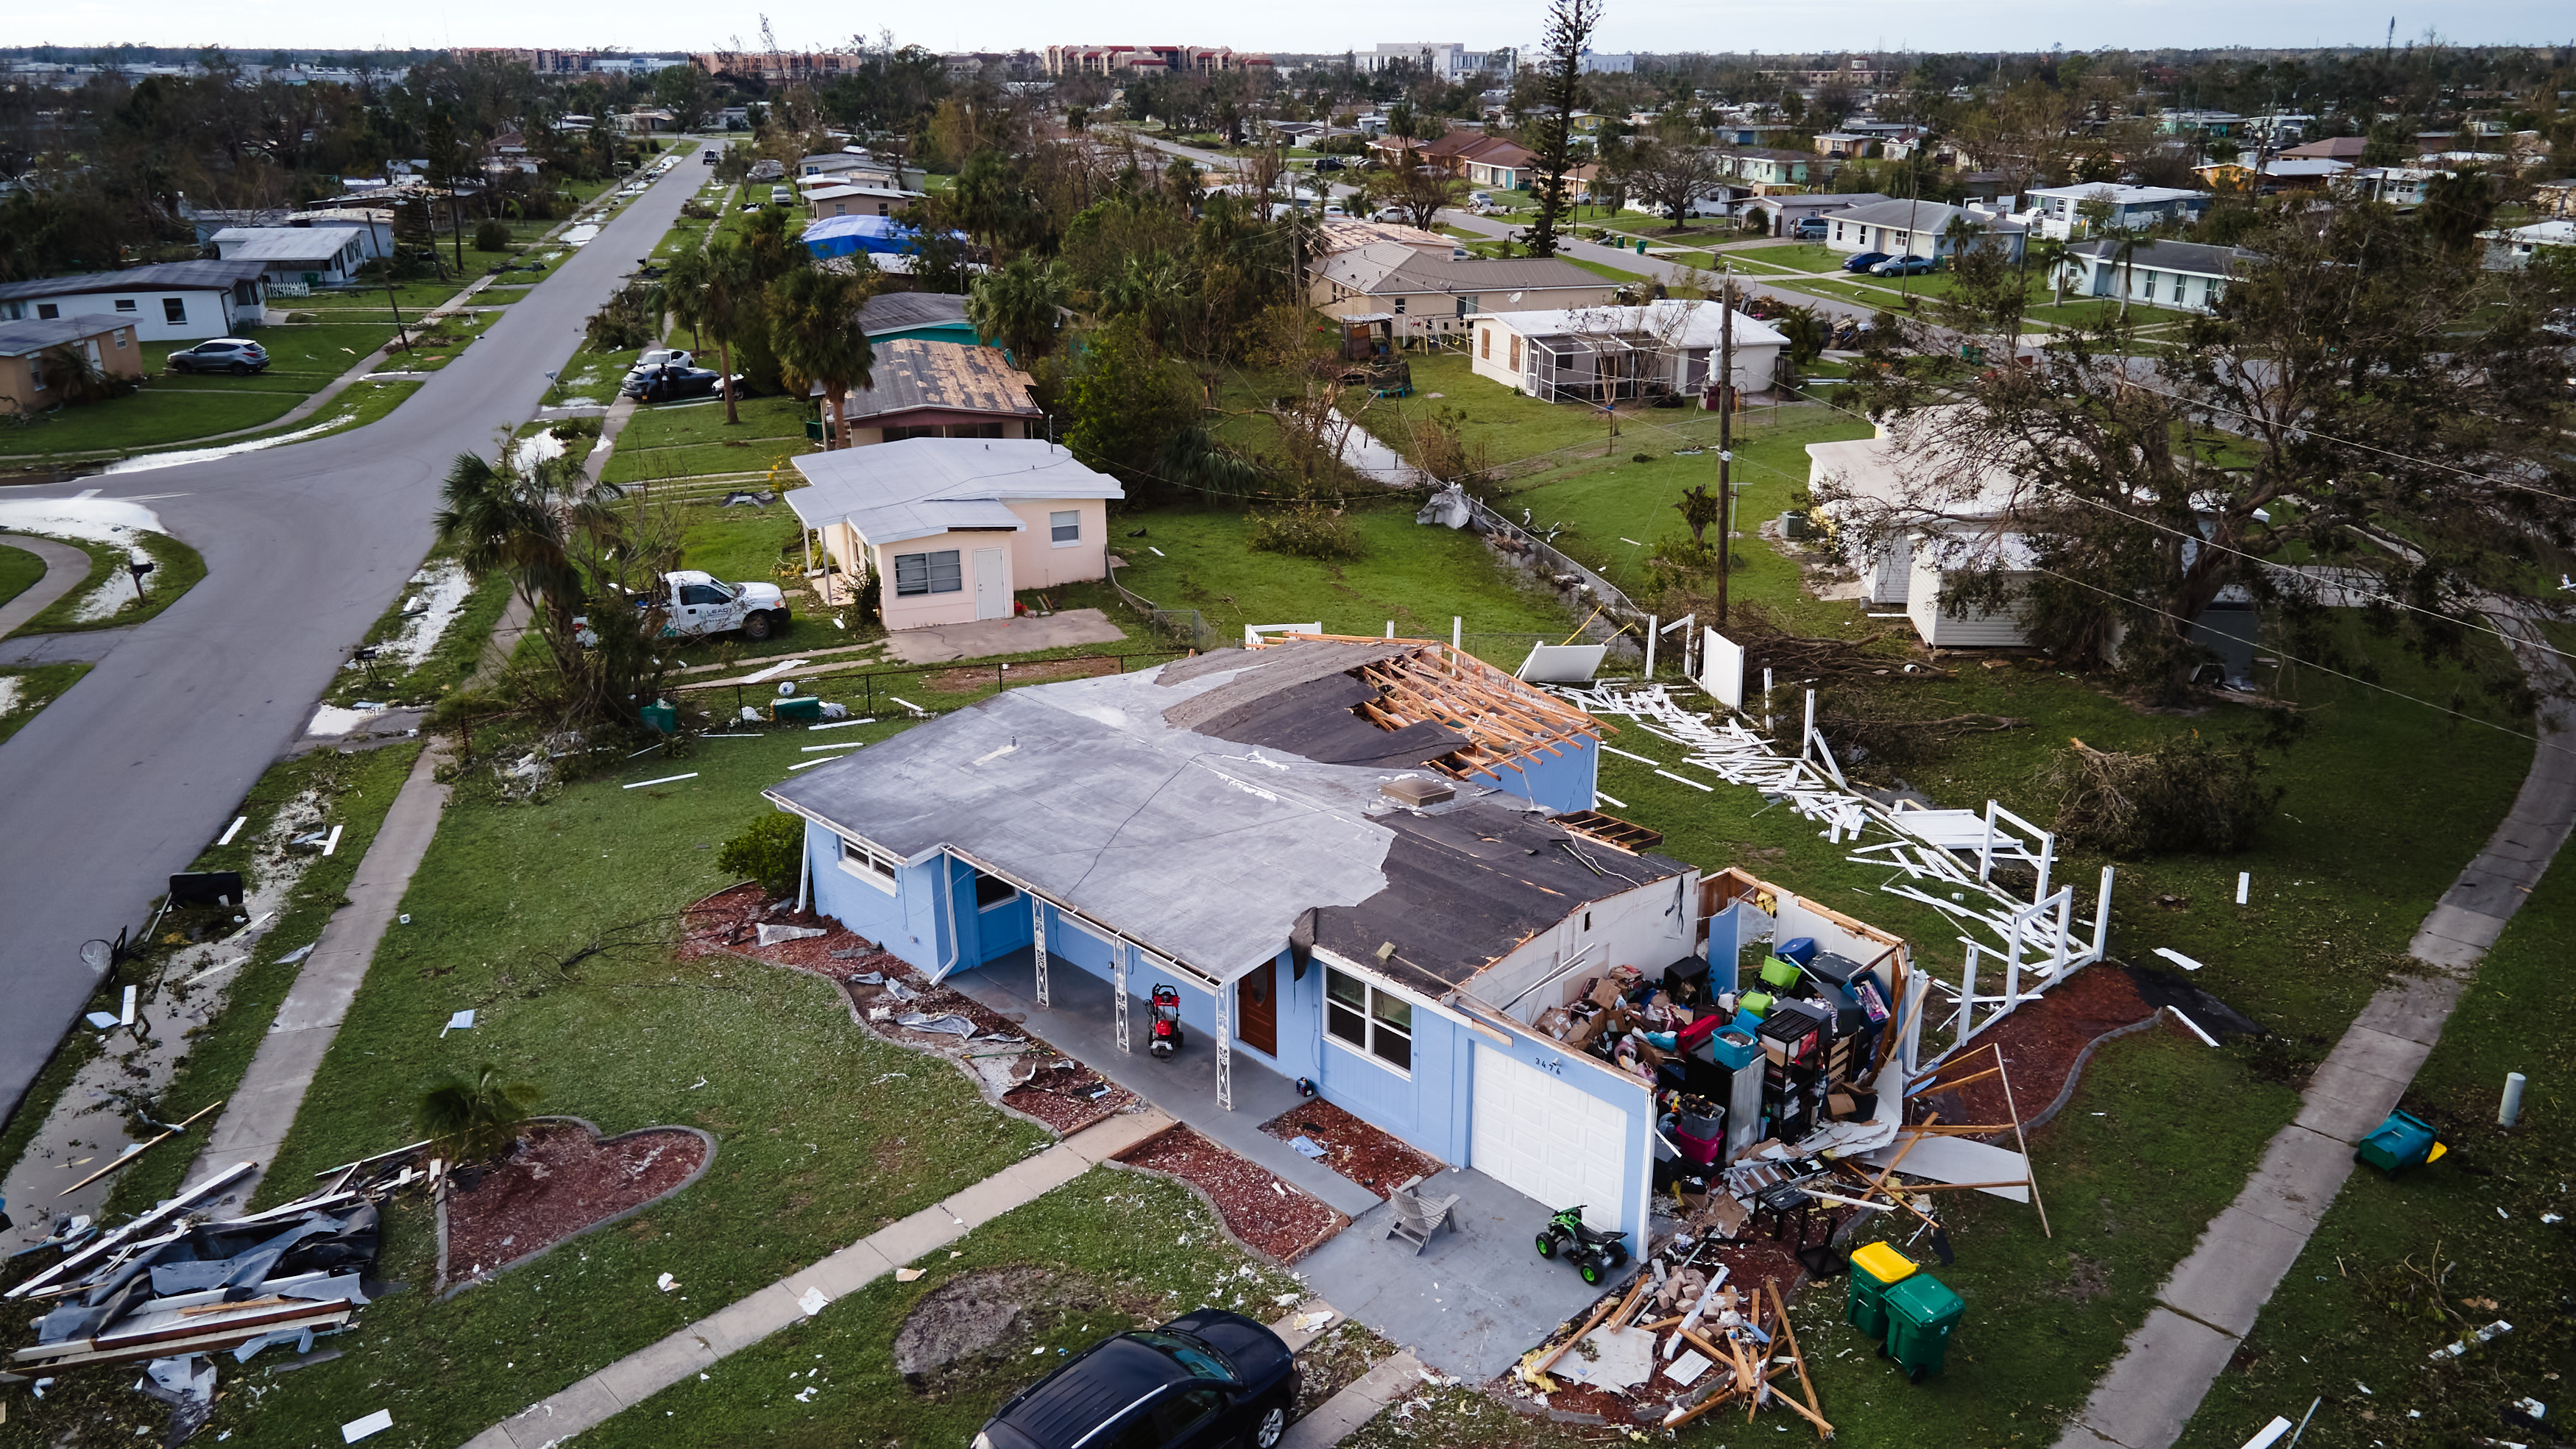 Scenes from Port Charlotte in the aftermath of Hurricane Ian